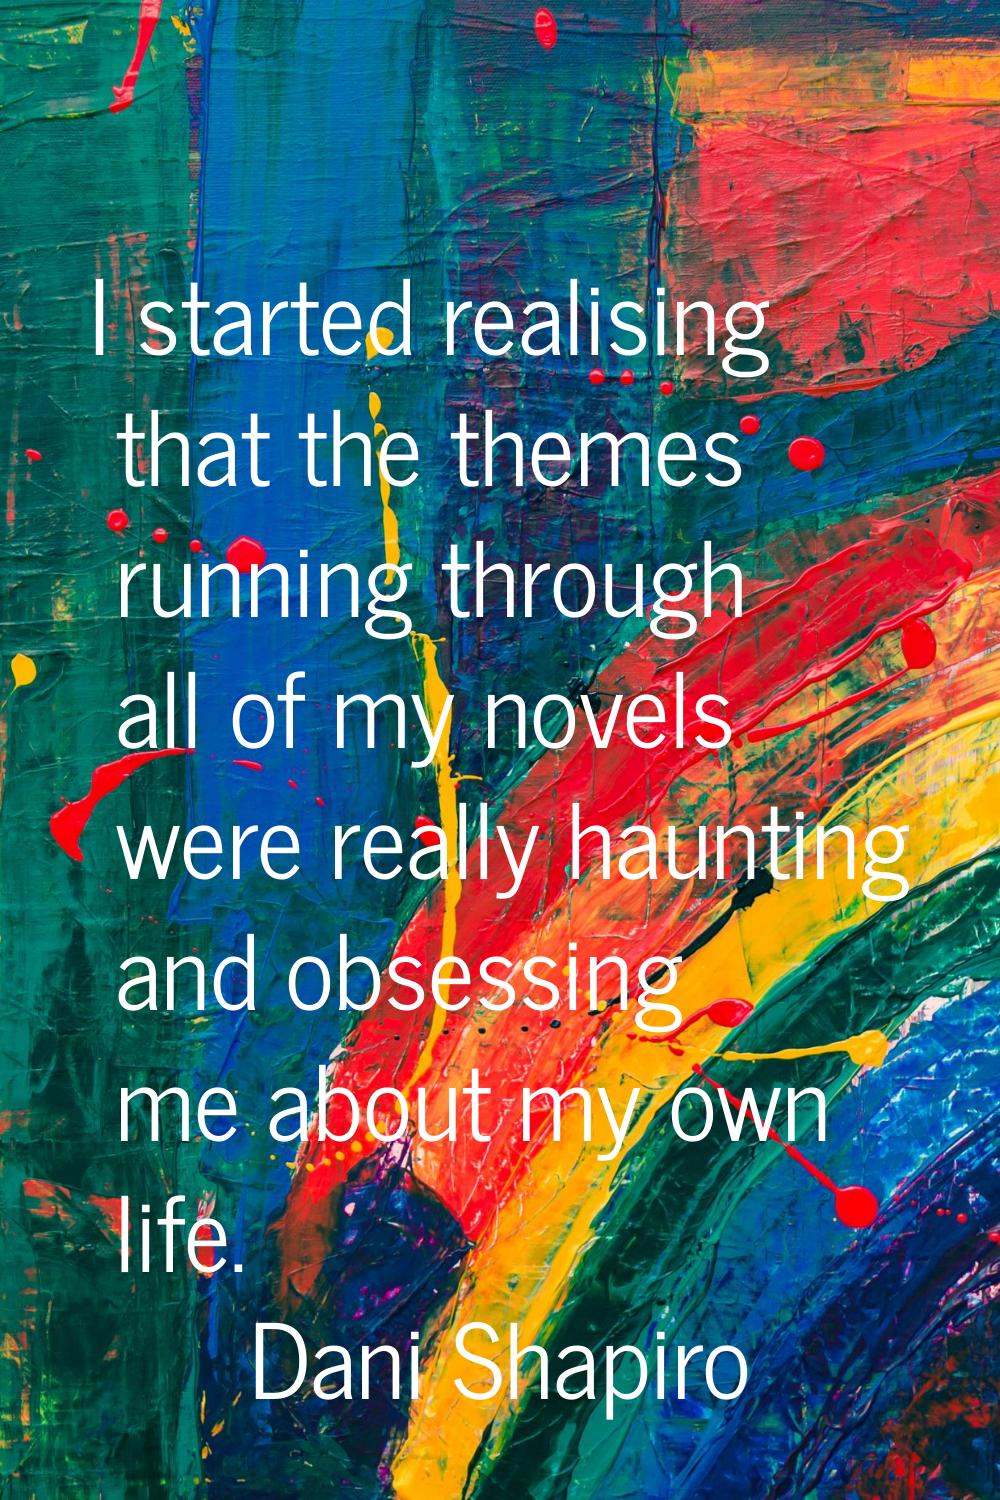 I started realising that the themes running through all of my novels were really haunting and obses